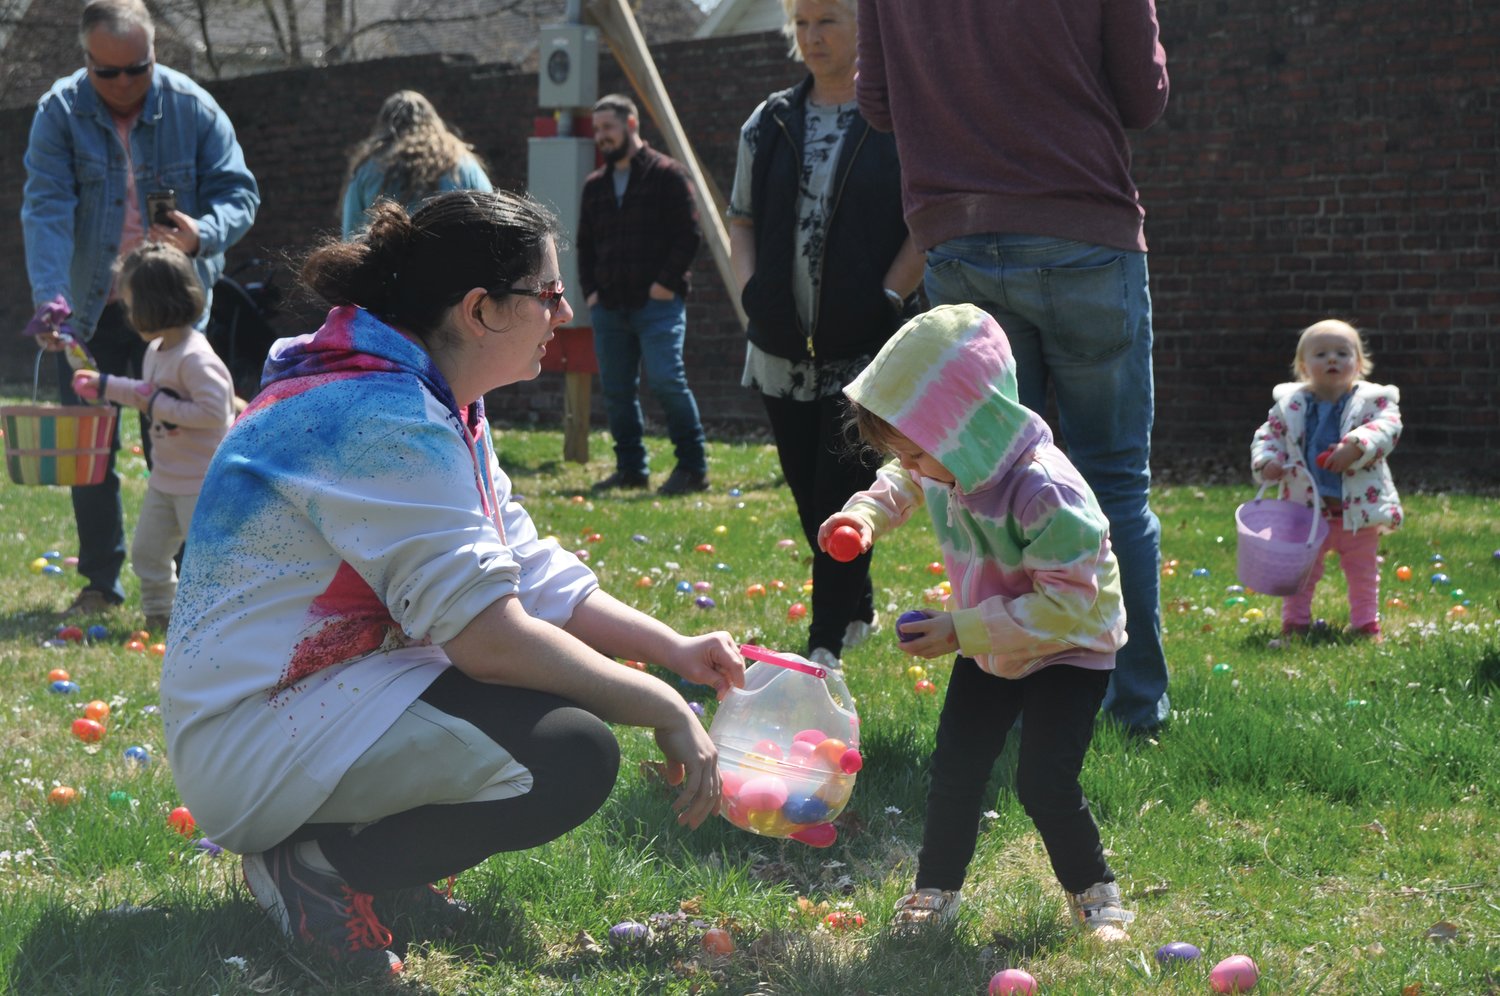 Tesslea Patton-Munn, 2, drops eggs in her basket held by mom, Jamie, at the Easter egg hunt on the grounds of the General Lew Wallace Study & Museum Saturday. The event was sponsored by the Crawfordsville Parks and Recreation Department and Nucor Steel.